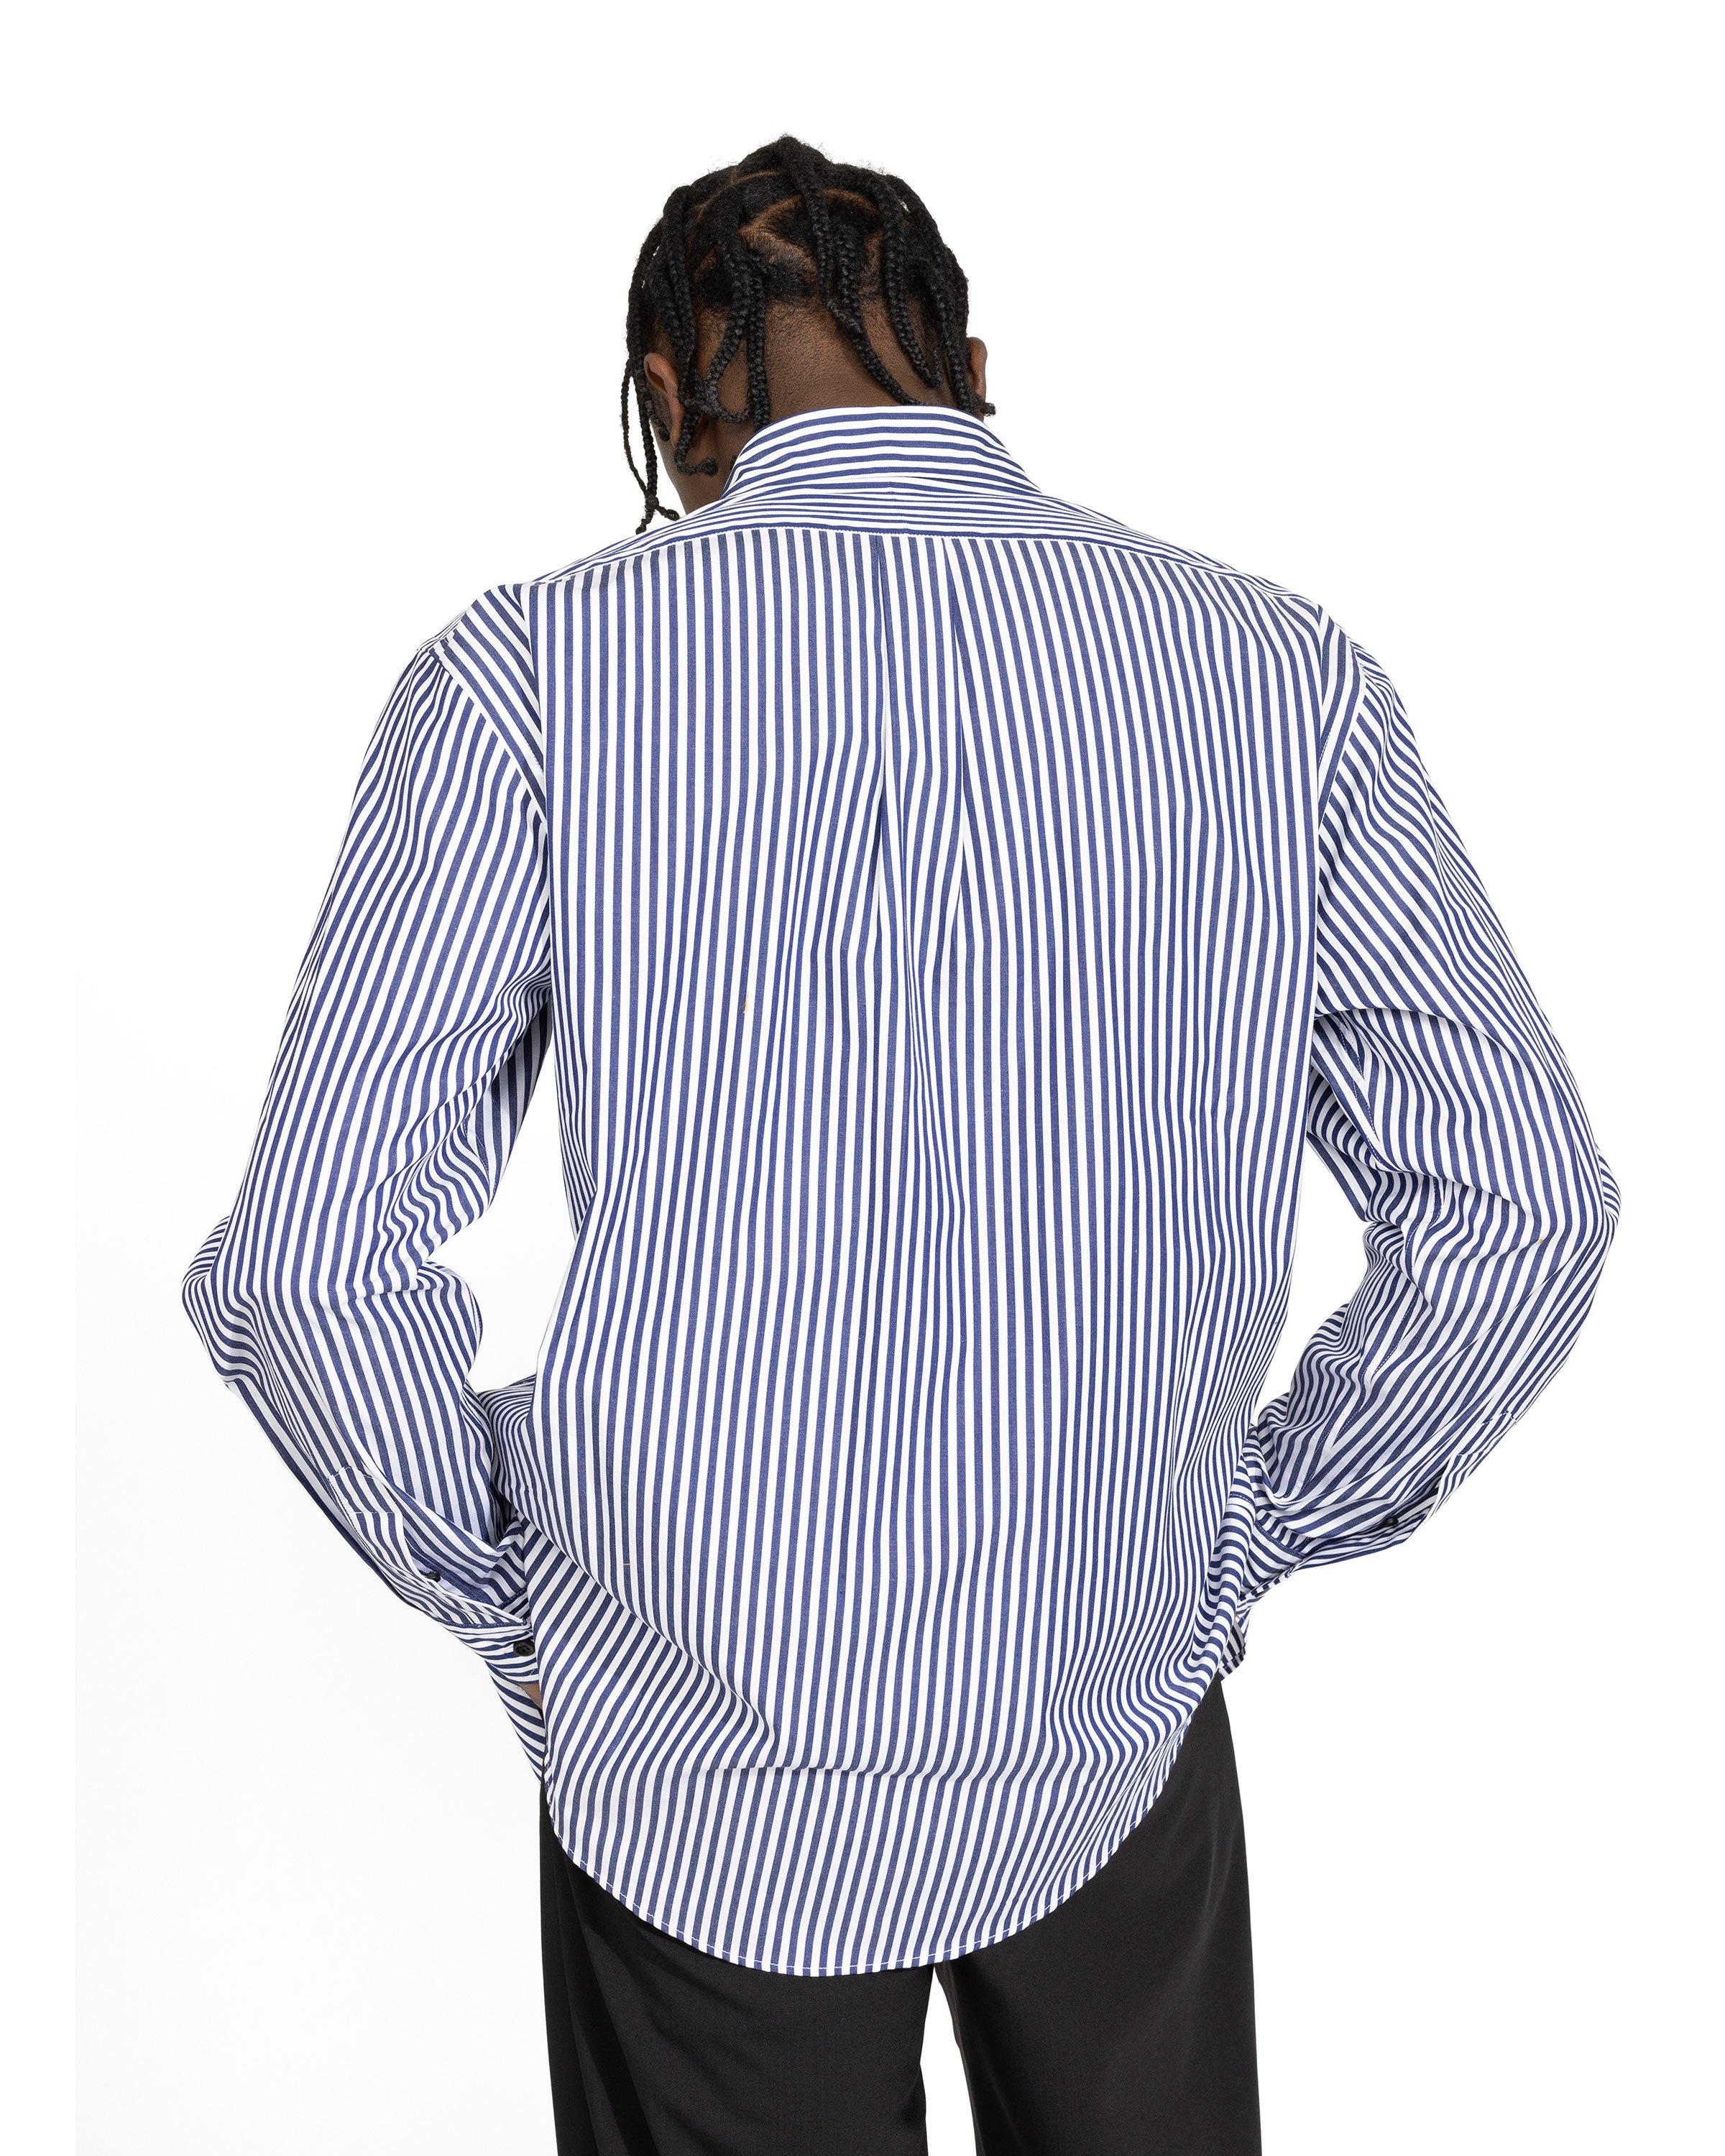 Y/Project – Pinched Logo Stripe Shirt Navy/White - Shirts - Blue - Image 3